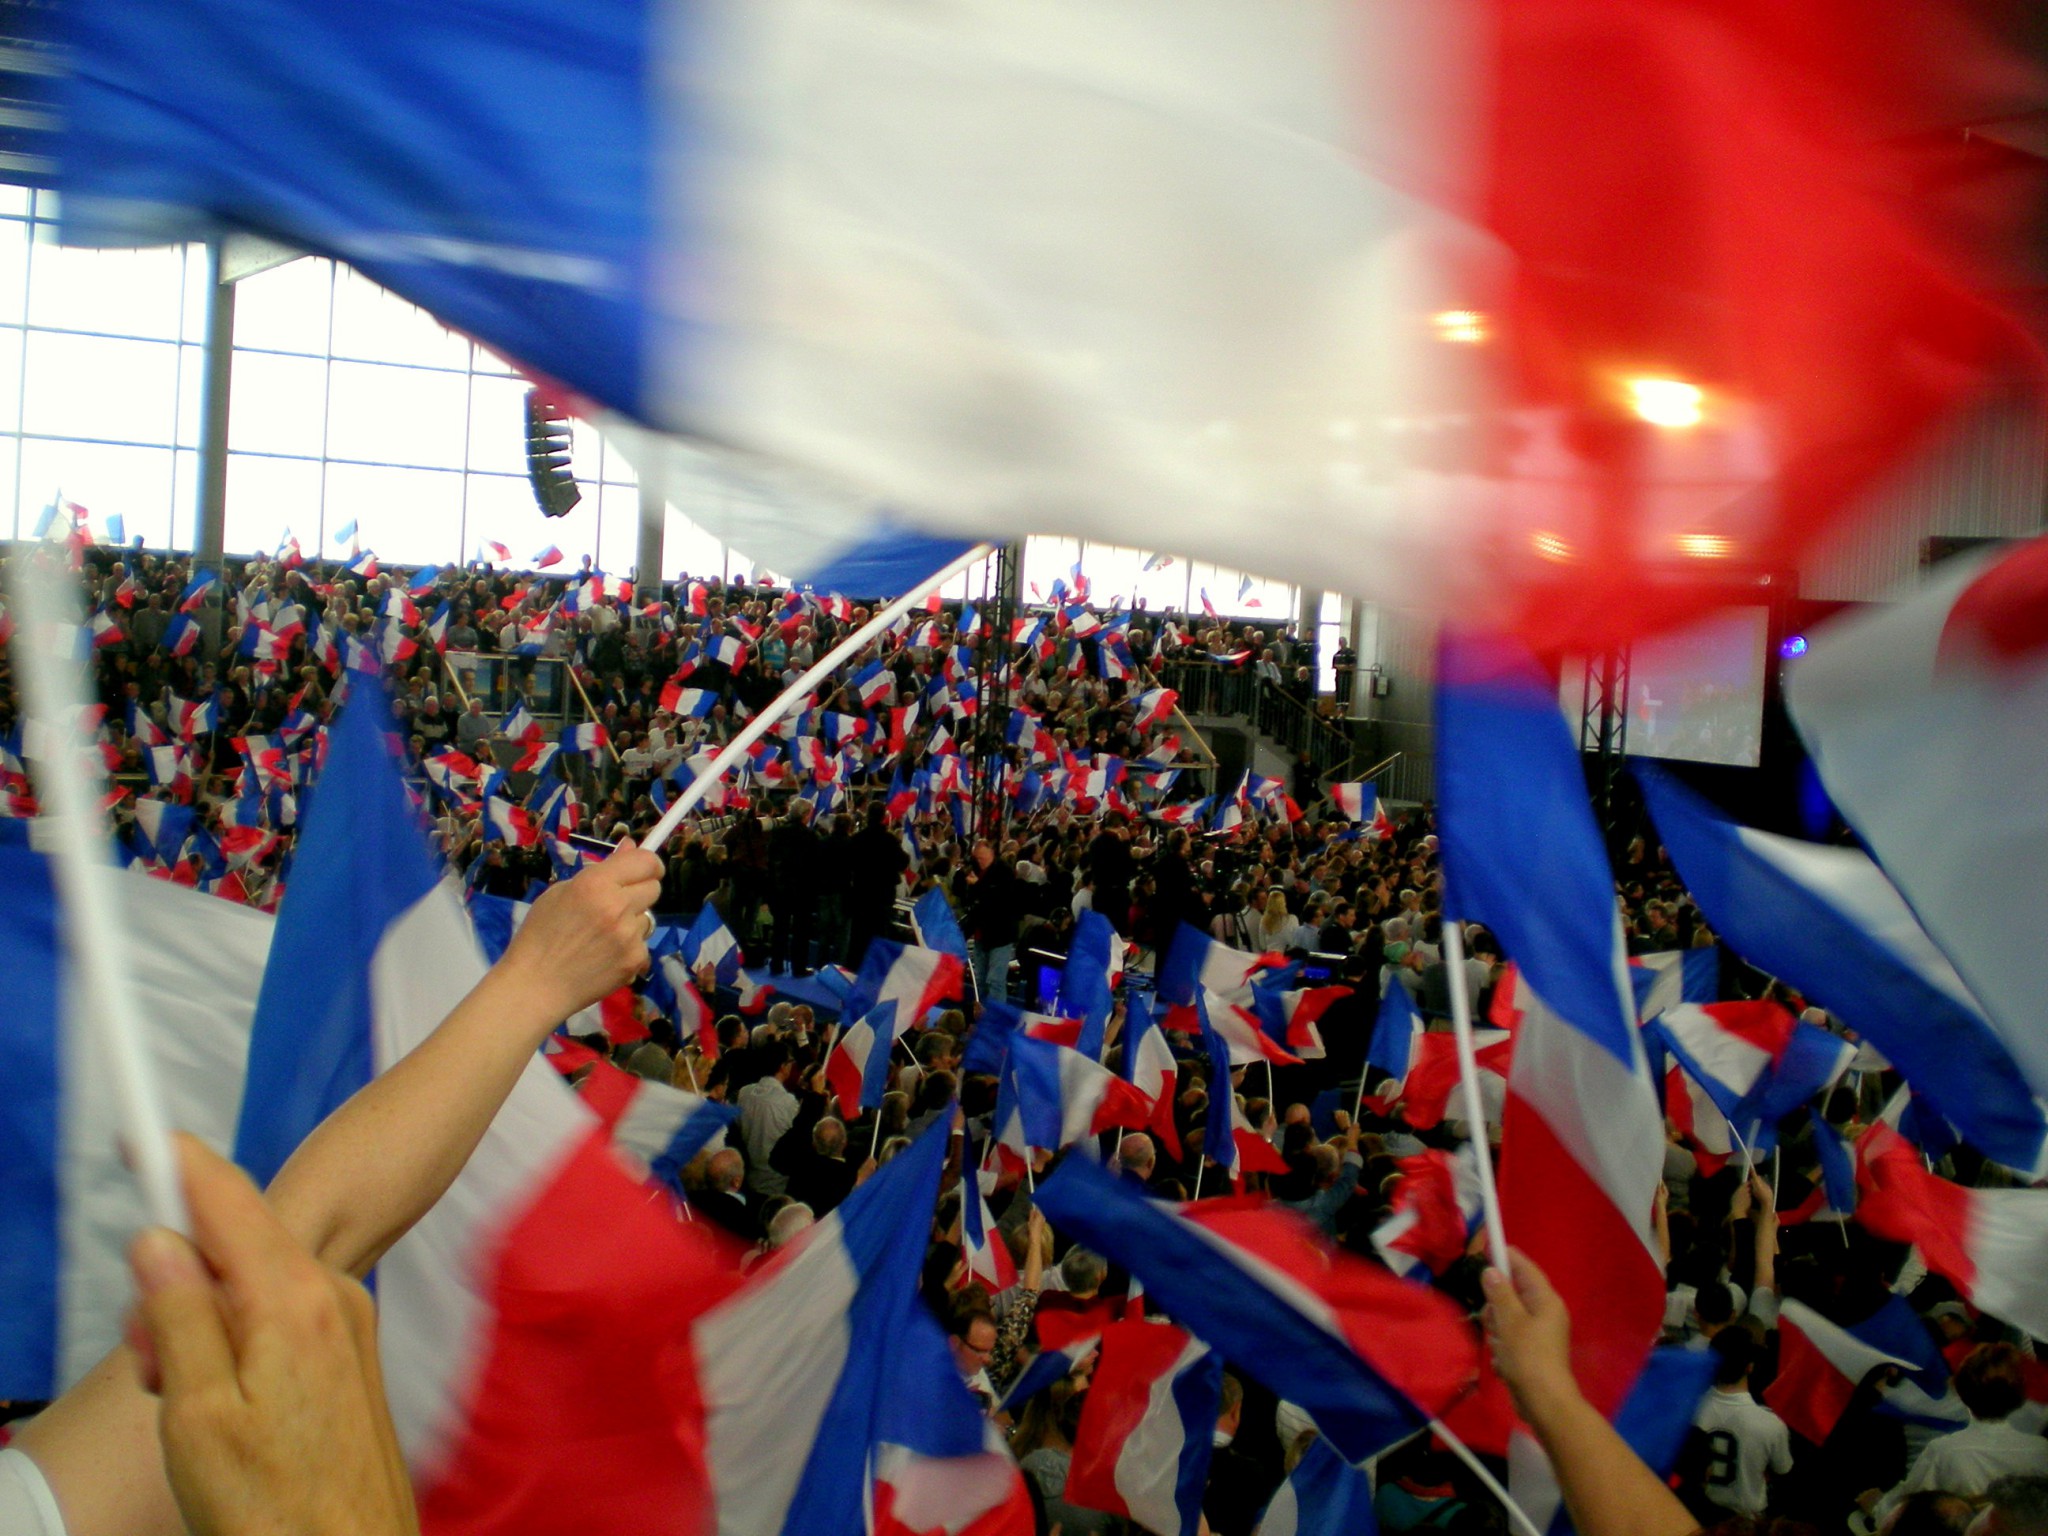 Meeting of candidate Sarkozy in Cernay, Alsace © French Moments